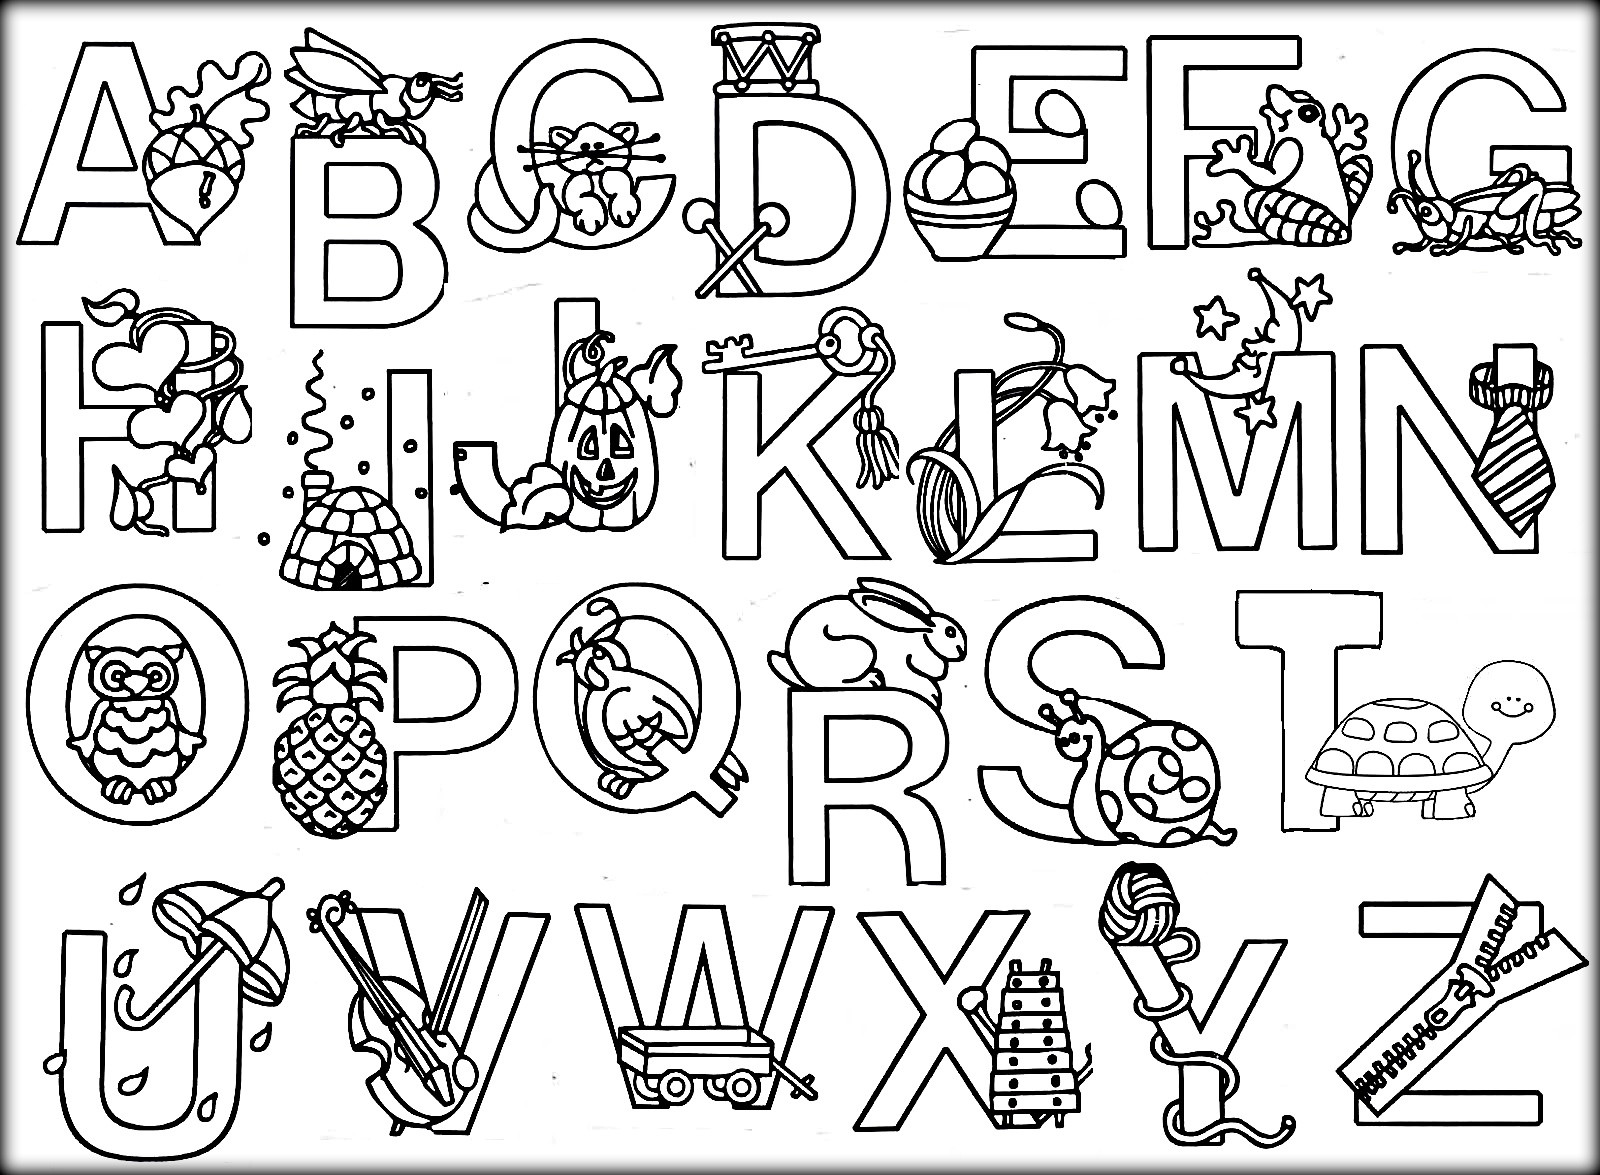 Free Printable Alphabet Coloring Pages at GetDrawings